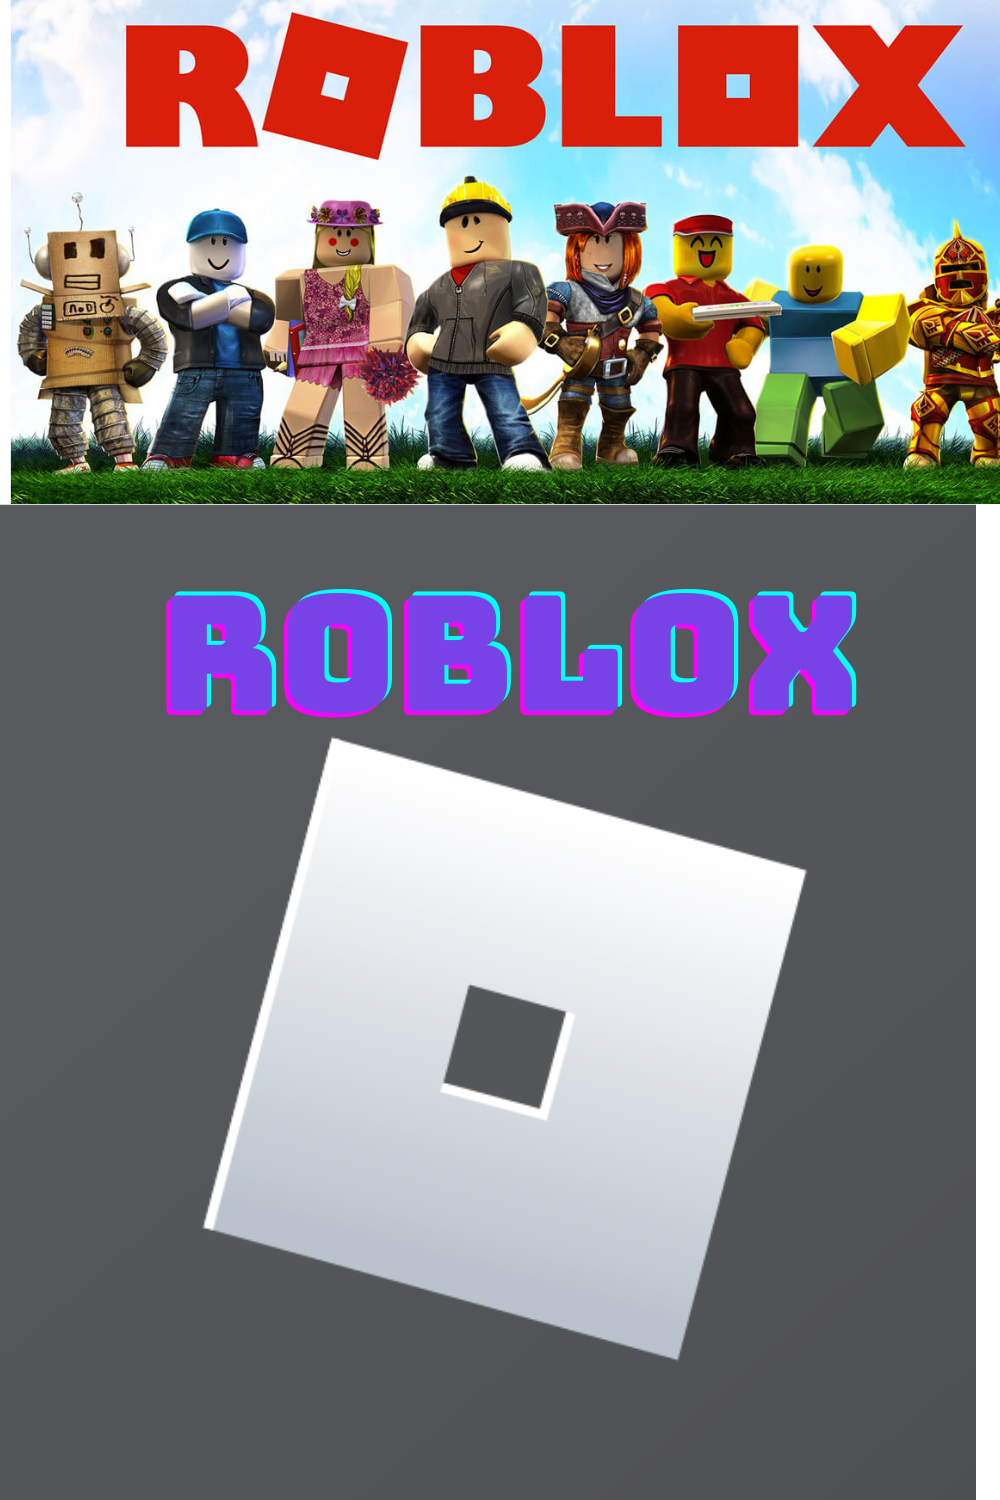 How To Accept Free Roblox Gift Card Codes